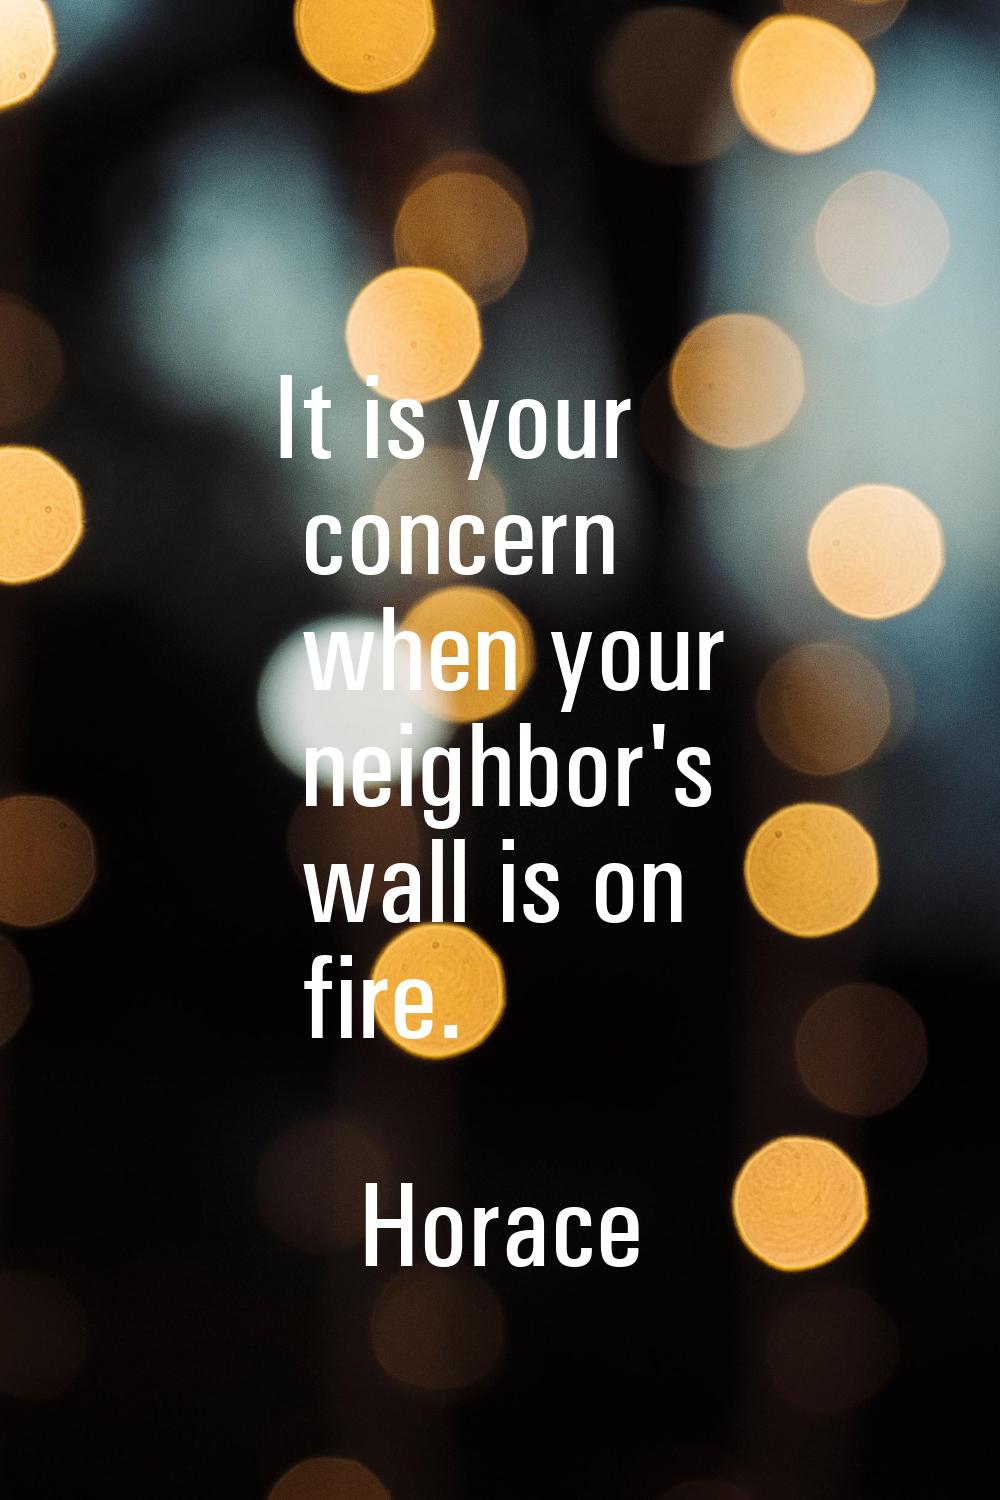 It is your concern when your neighbor's wall is on fire.